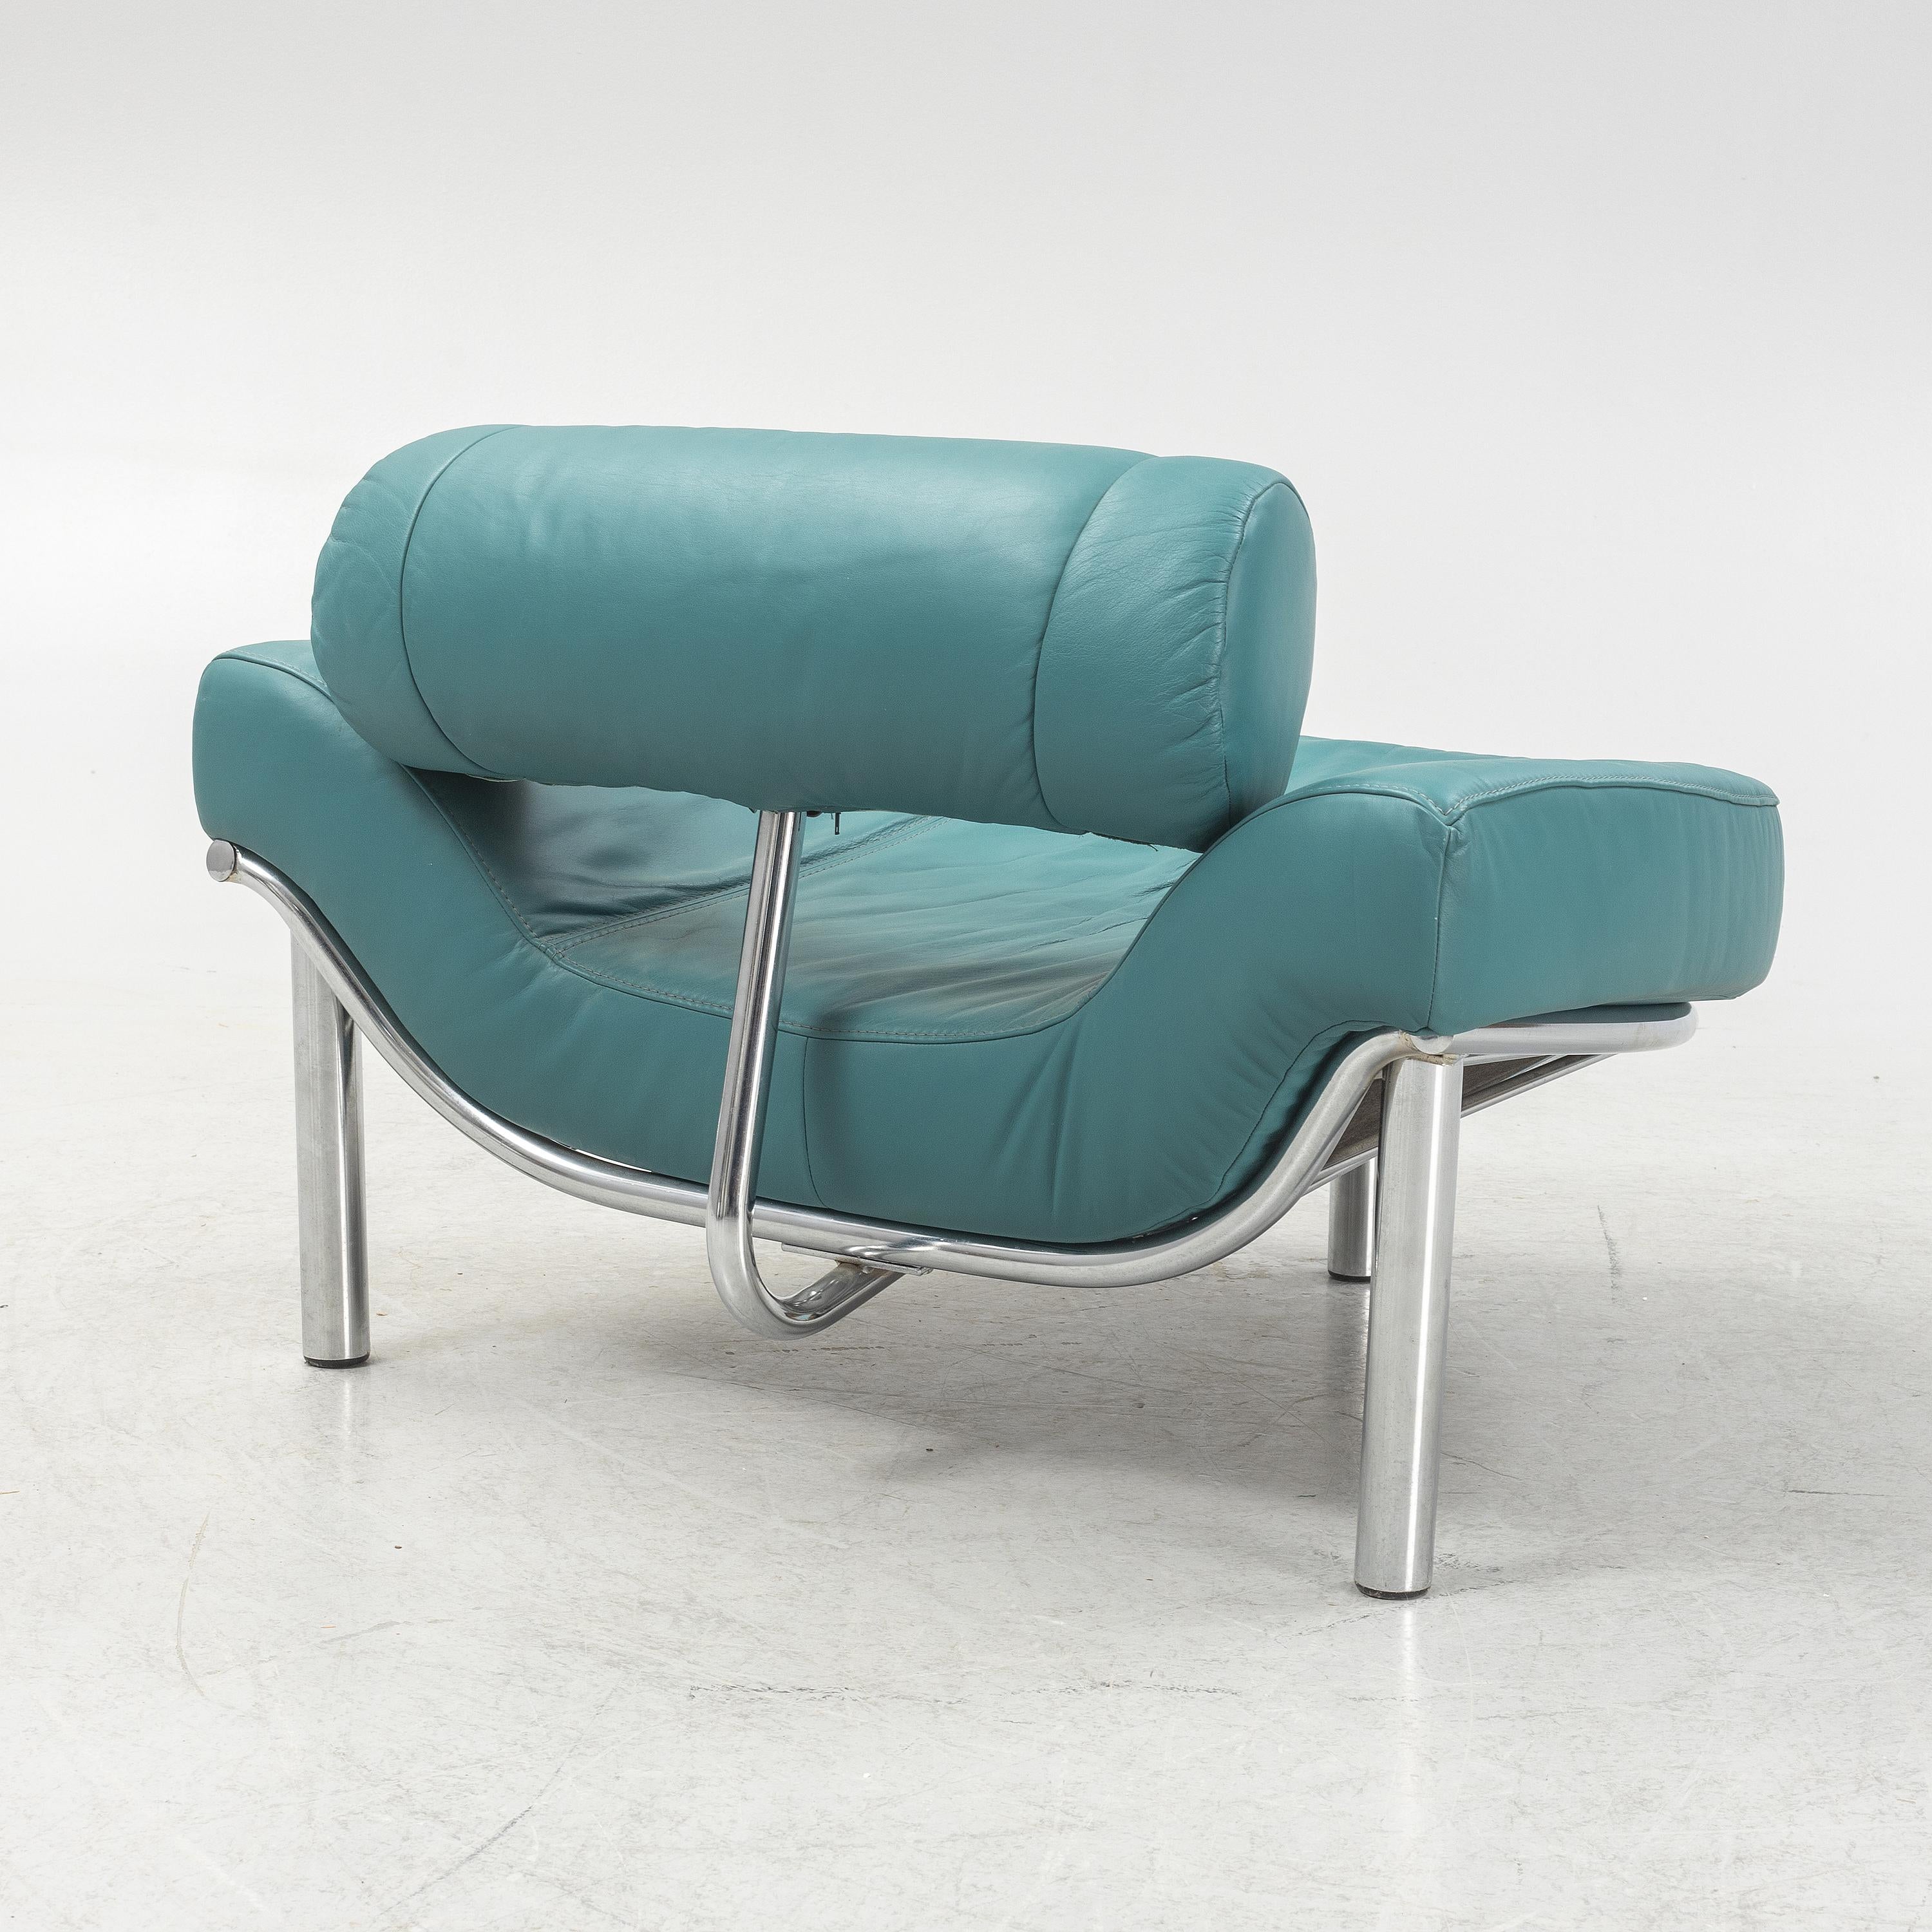 Kwok Hoi Chan style rare armchair steel and blue leather France 1970.
rare model in tubular steel with turquoise blue cushions .
Good condition. light patina on the leather 